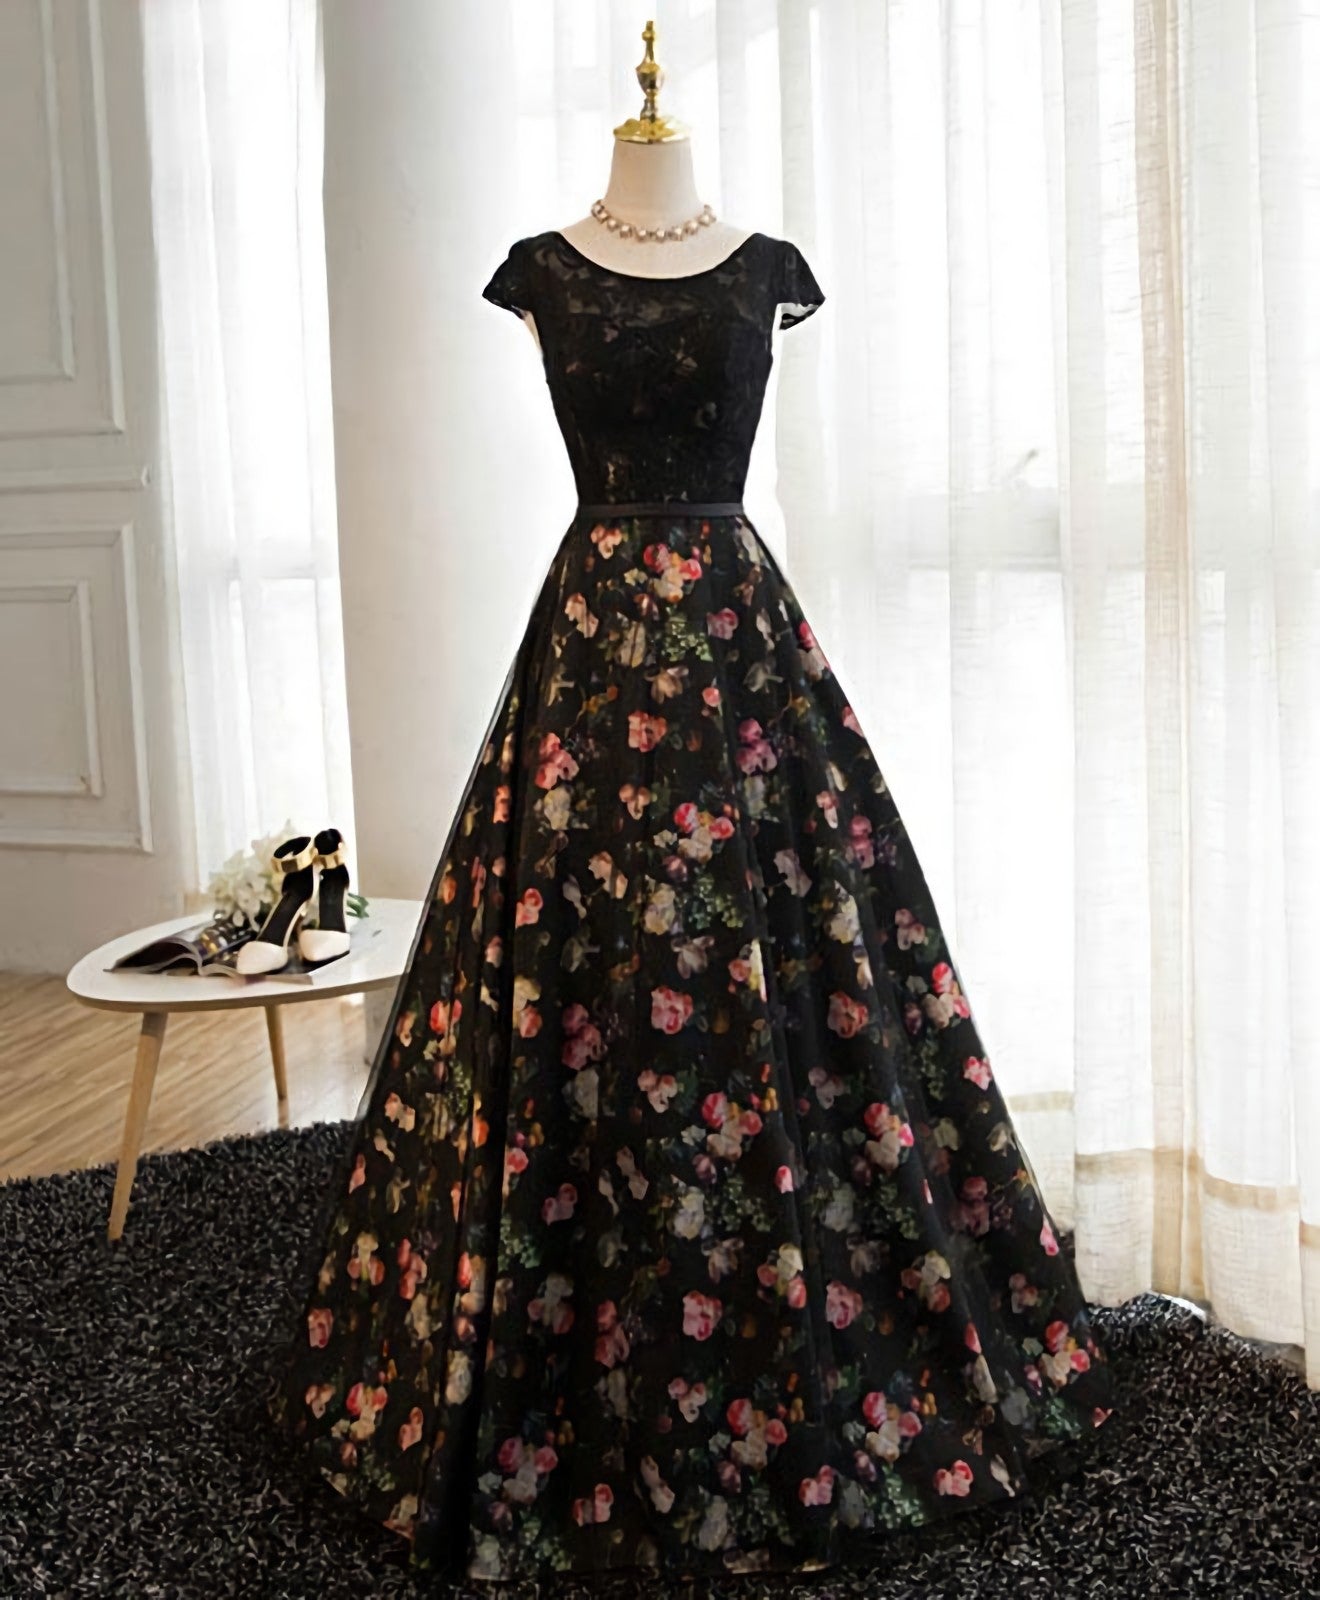 Homecoming Dress Simple, Black Lace Floral Patterns Long Prom Dress, Black Evening Dress